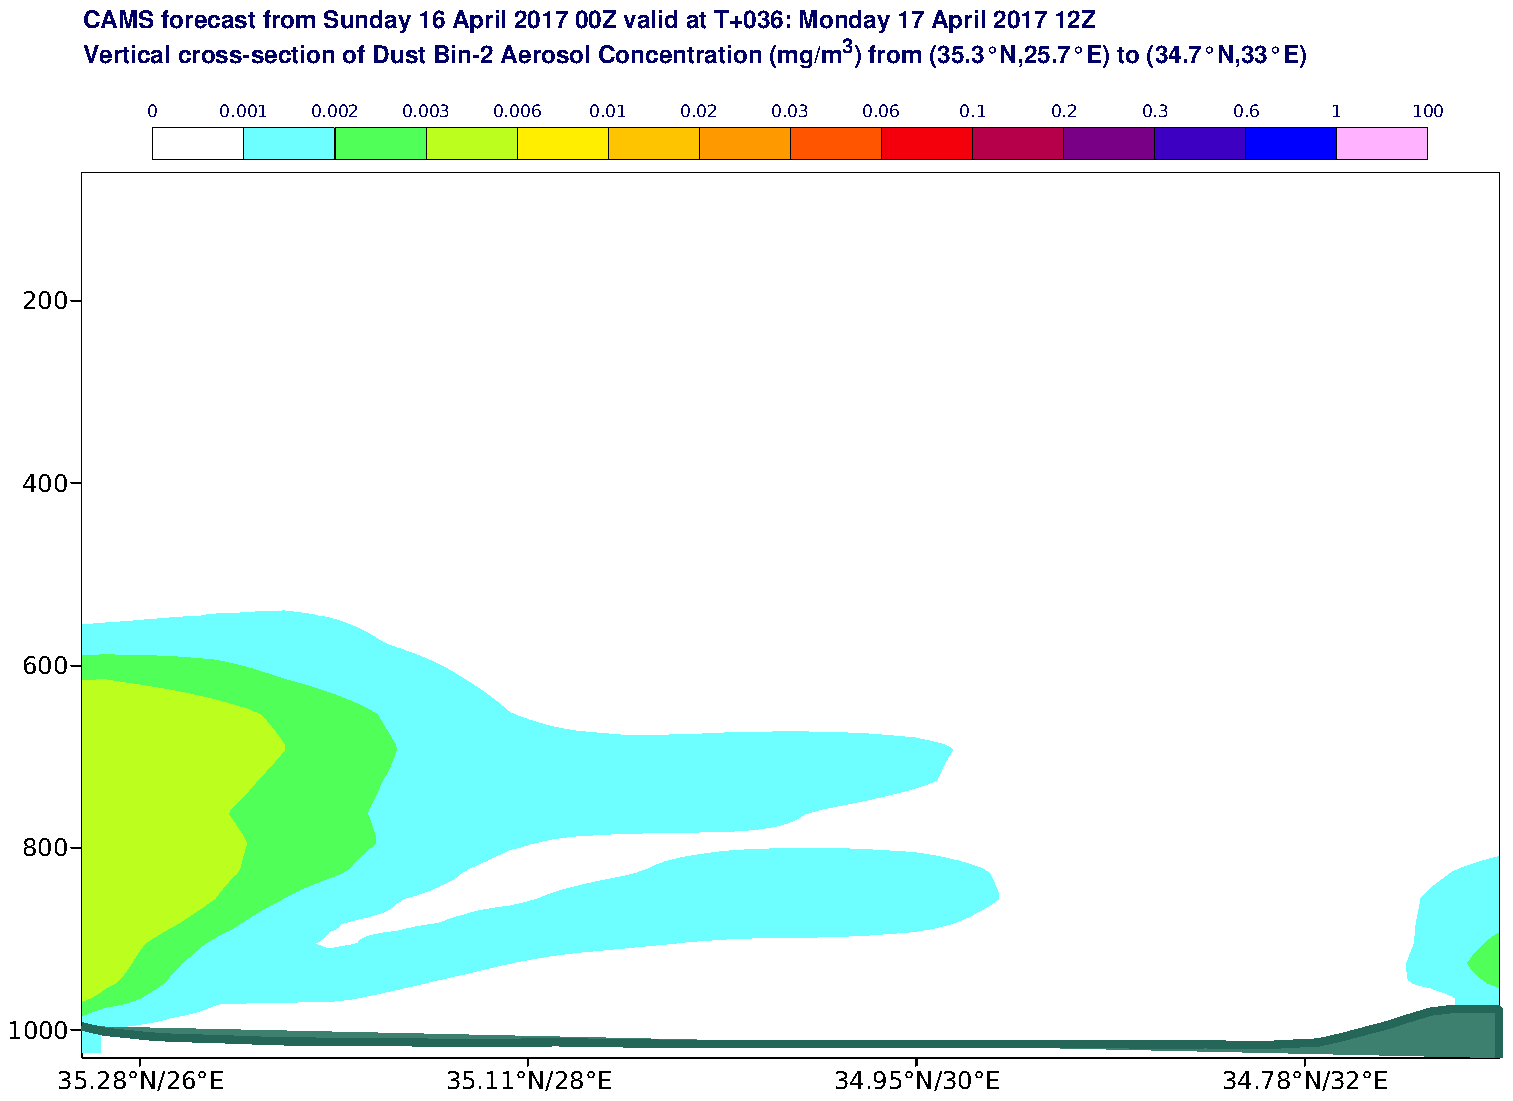 Vertical cross-section of Dust Bin-2 Aerosol Concentration (mg/m3) valid at T36 - 2017-04-17 12:00